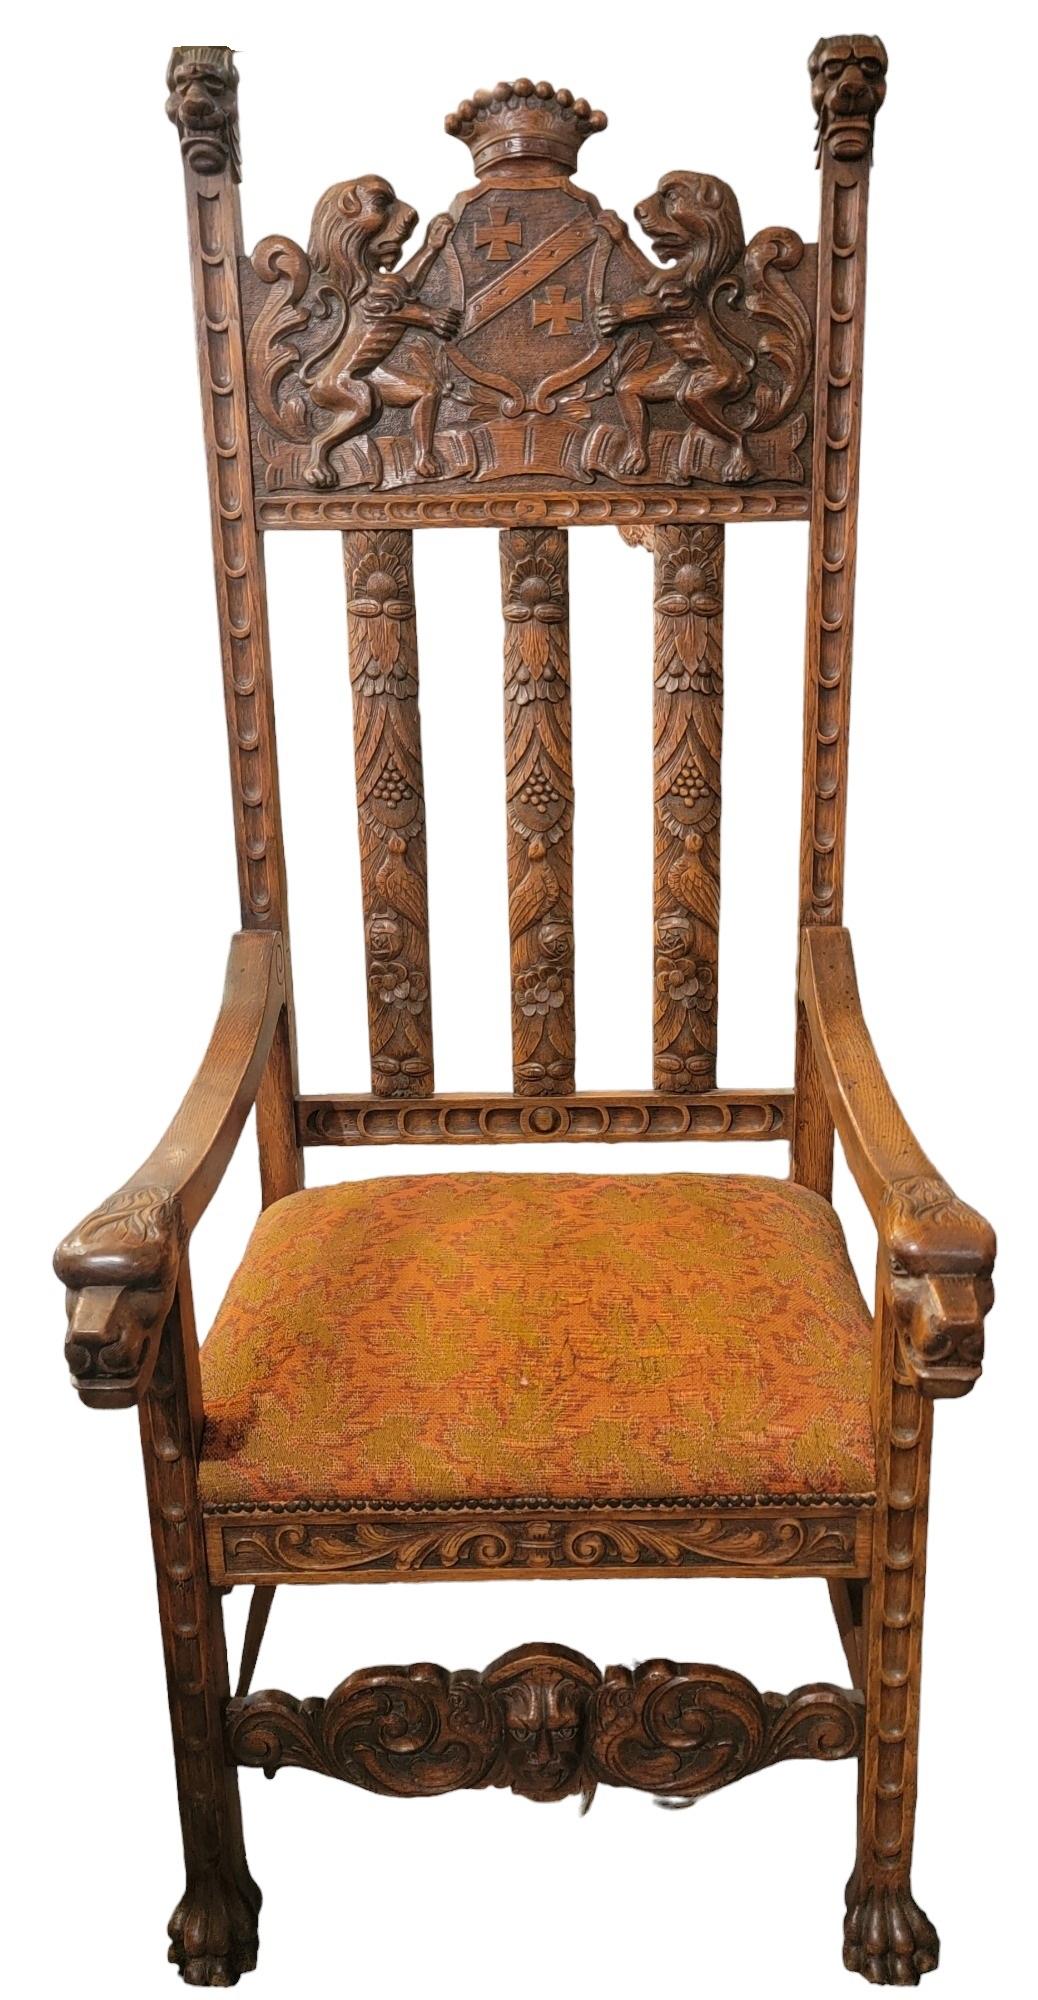 19thc English  Hand Carved Wooden Kings Chair. Wonderful design on the slats of the chairs. wonderful carving at the top of the chair has 2 lions holding a shield over/ behind the head of the person sitting.
Measures approx.  - 27d x 25w x 63.5h and